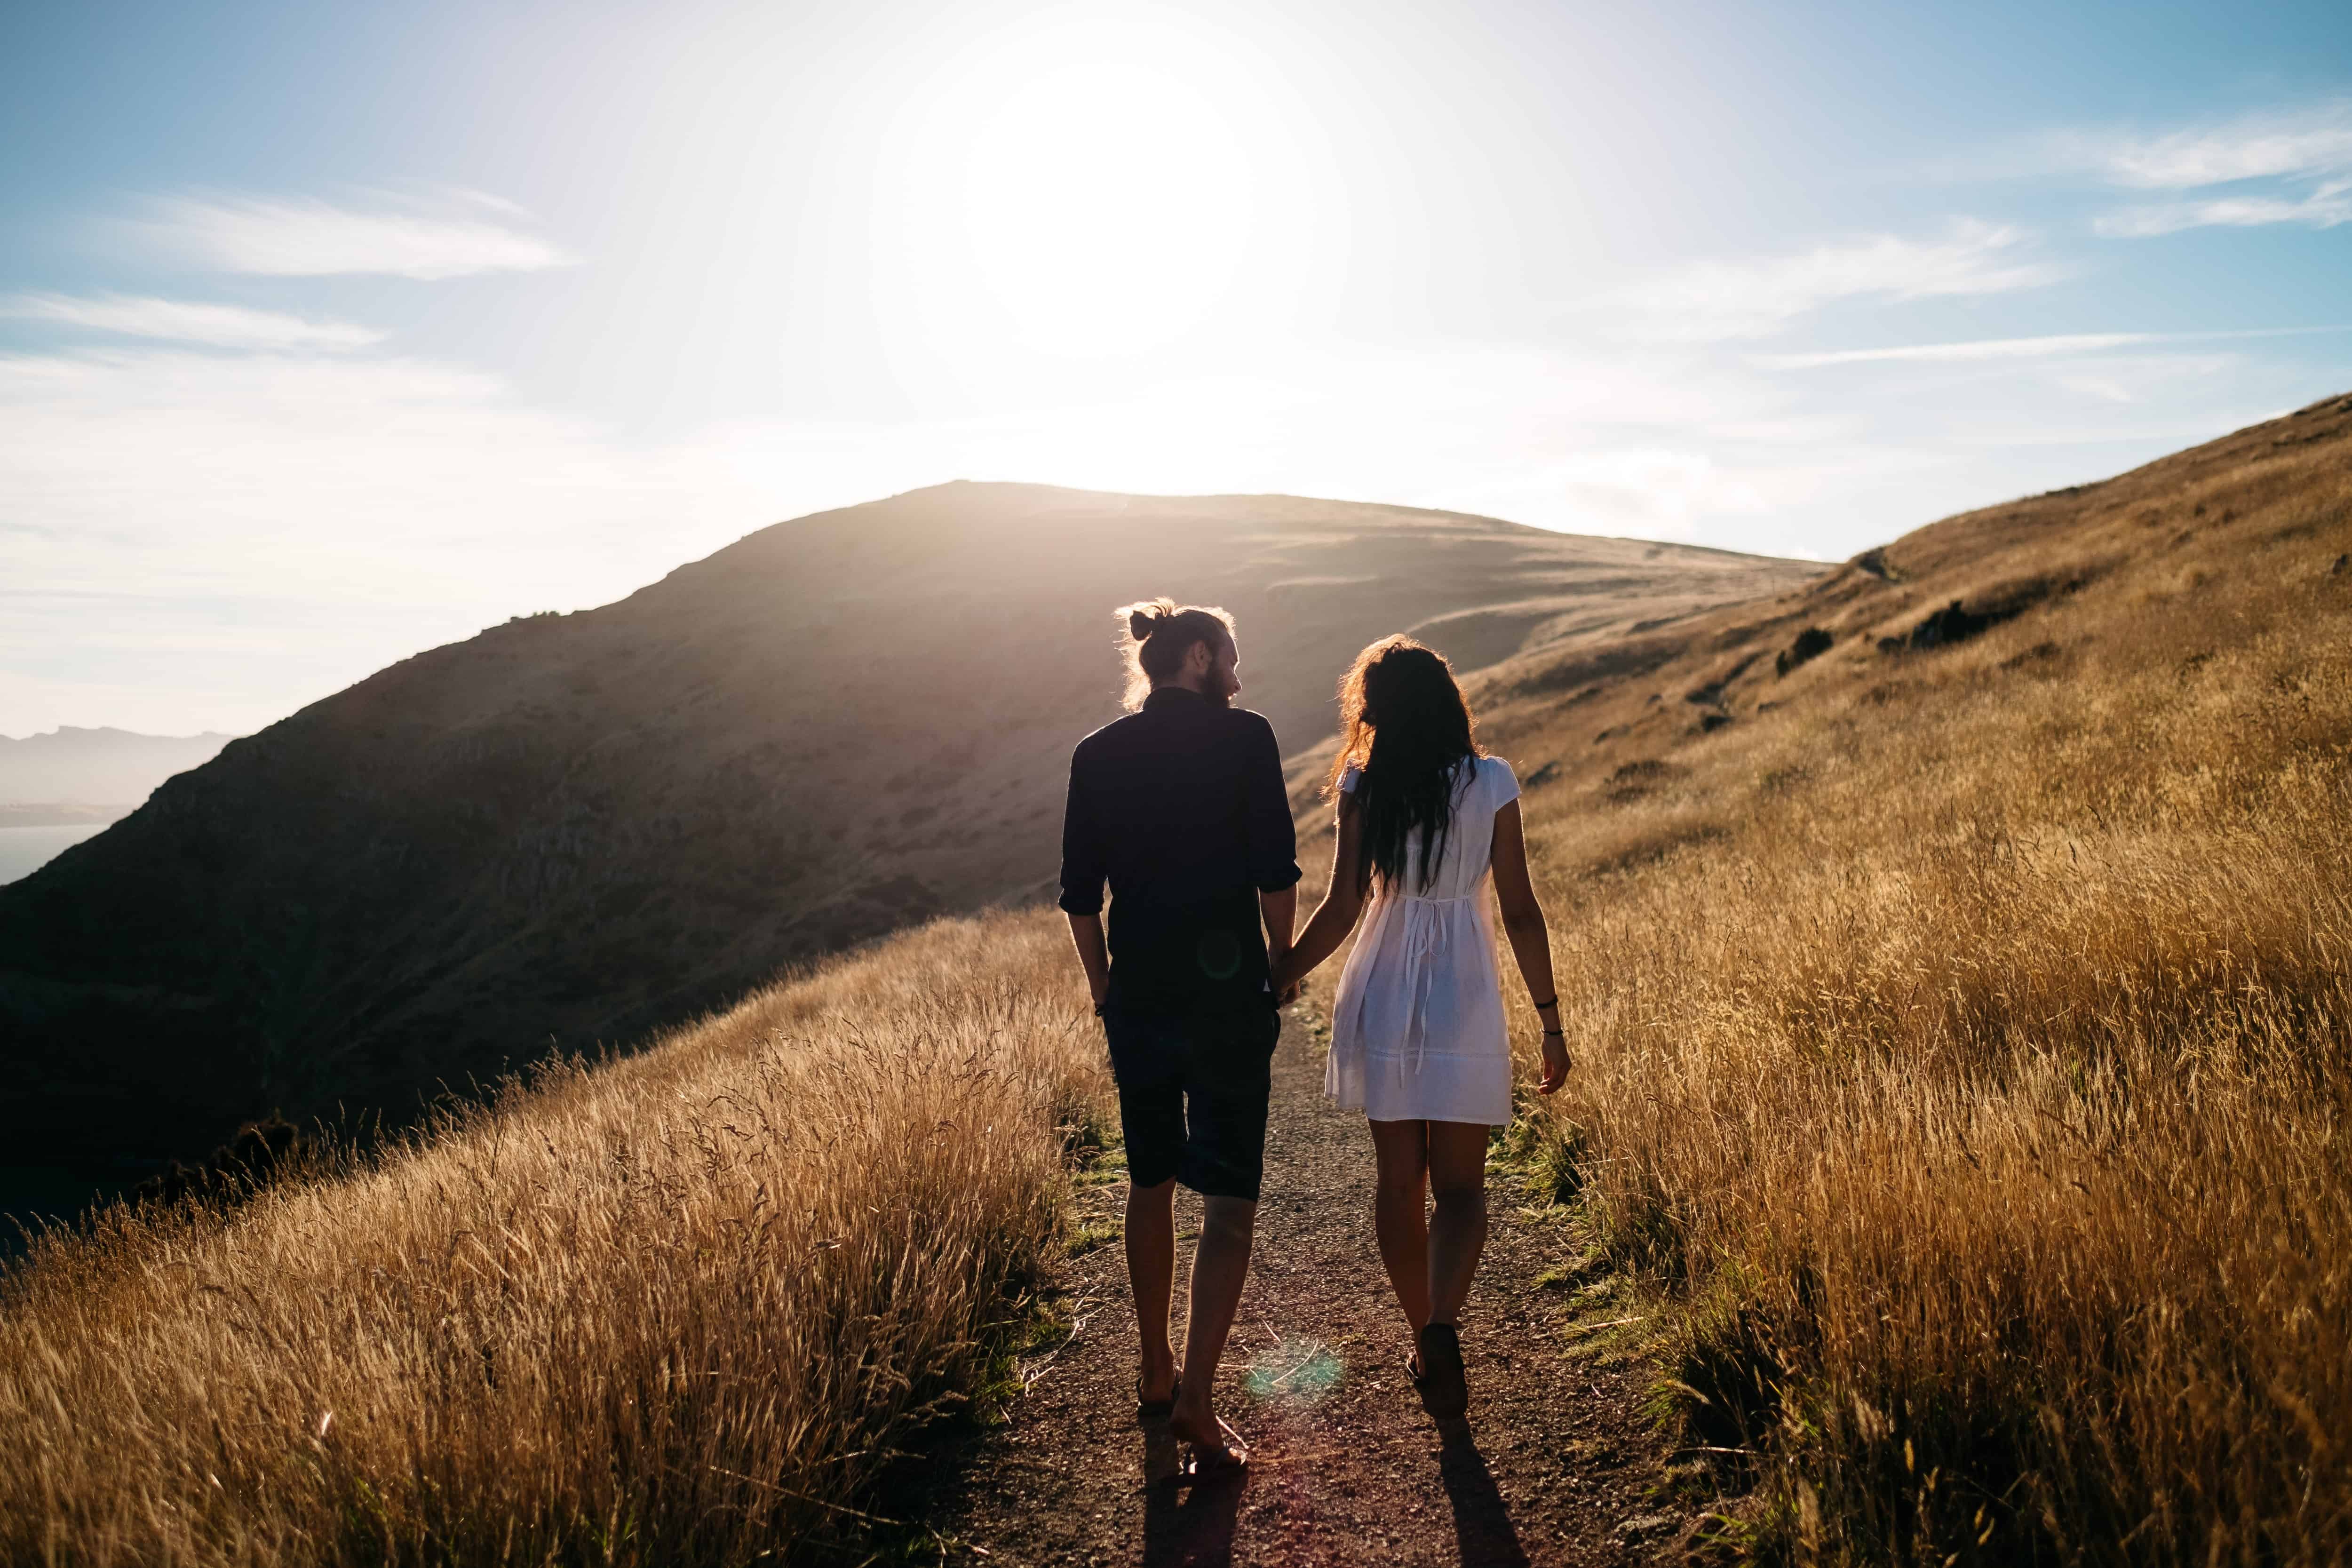 How To Get The Spark Back In Your Relationship: 5 Things To Remember